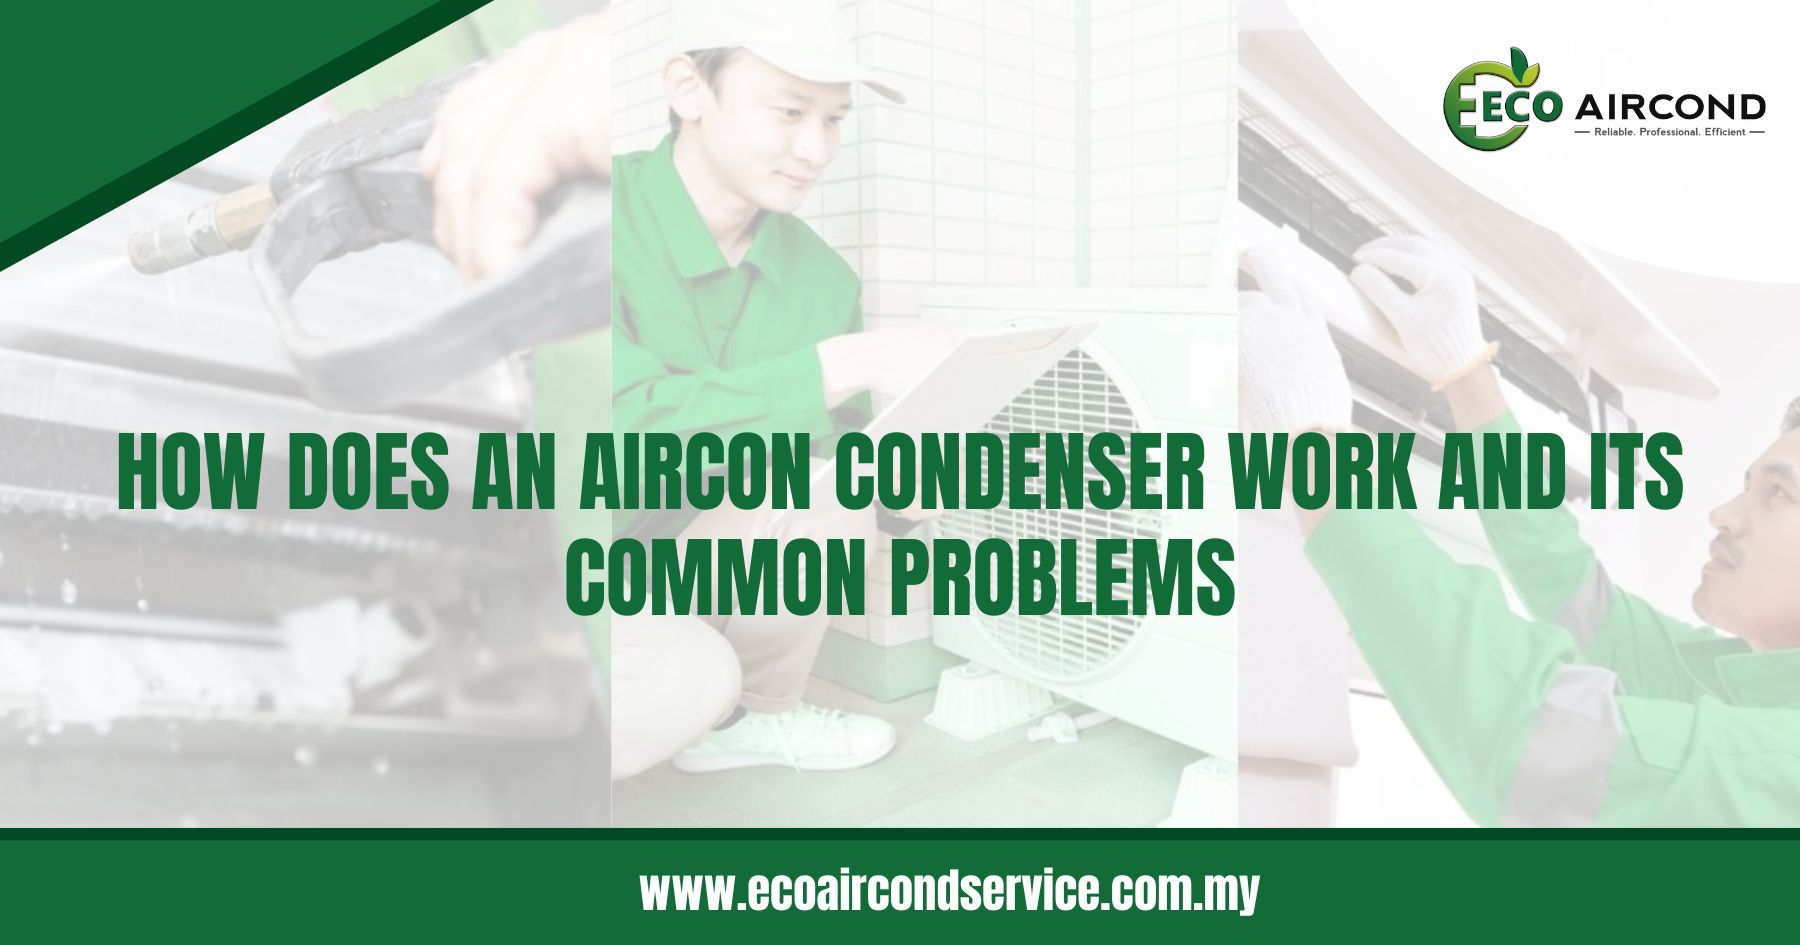 How Does an Aircon Condenser Work and Its Common Problems